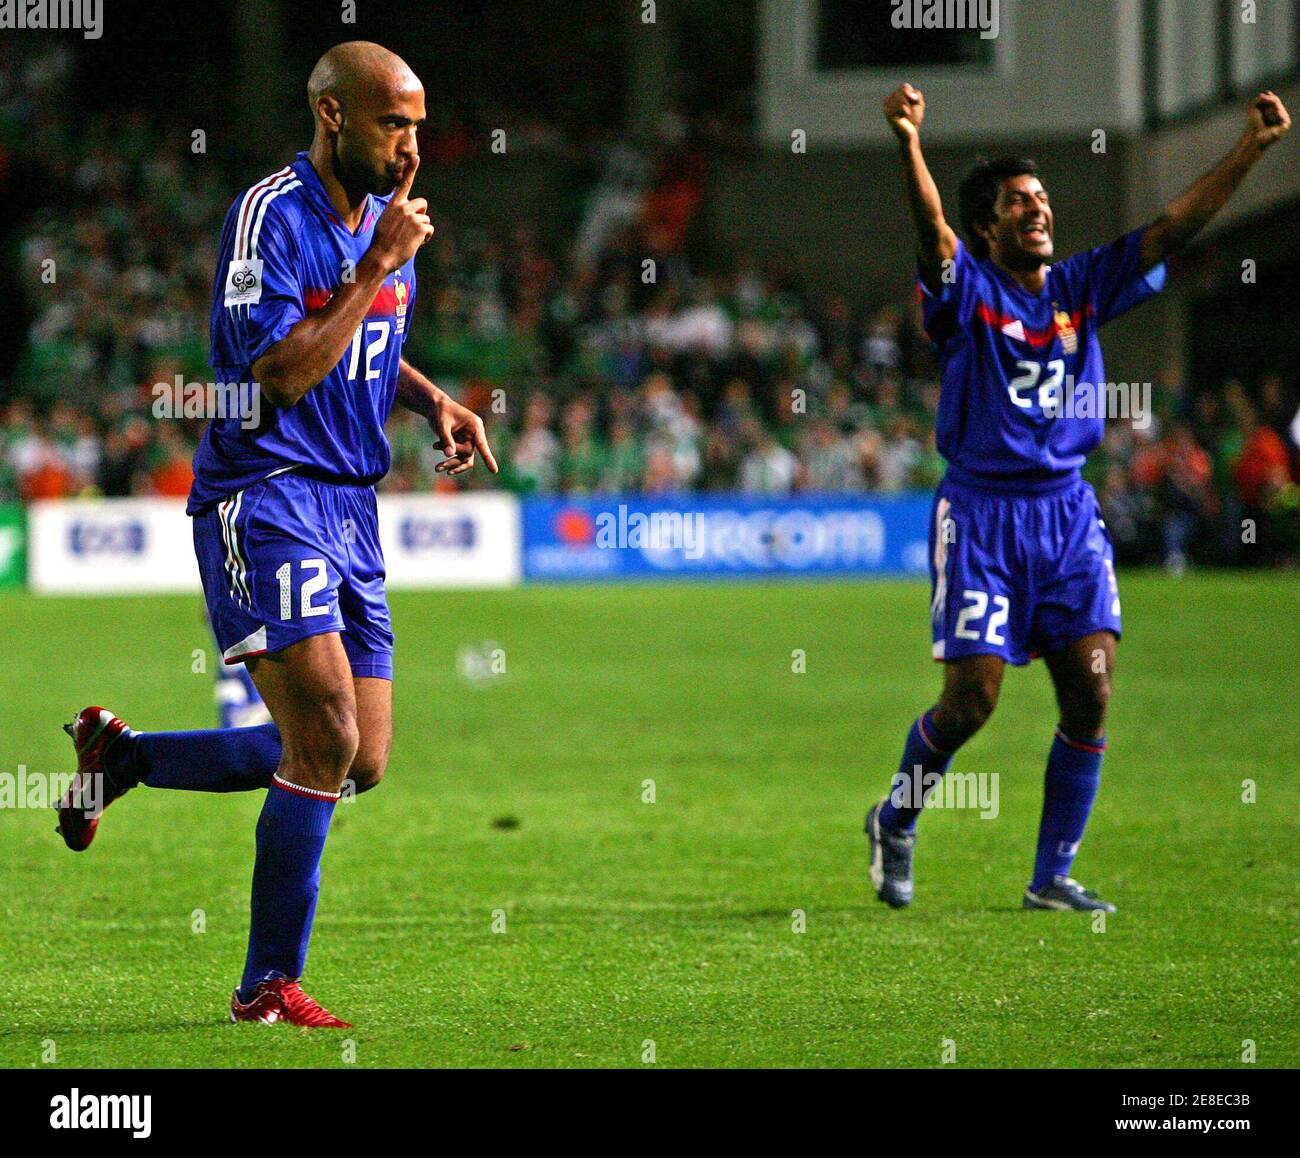 France's Henry celebrates goal with Dhorasoo during World Cup qualifying match against Ireland in Dublin.  France's Thierry Henry (L) celebrates his goal with Vikash Dhorasoo during their World Cup 2006, Group Four, qualifying soccer match against Ireland at Lansdowne Road in Dublin, September 7, 2005. REUTERS/Eddie Keogh Stock Photo